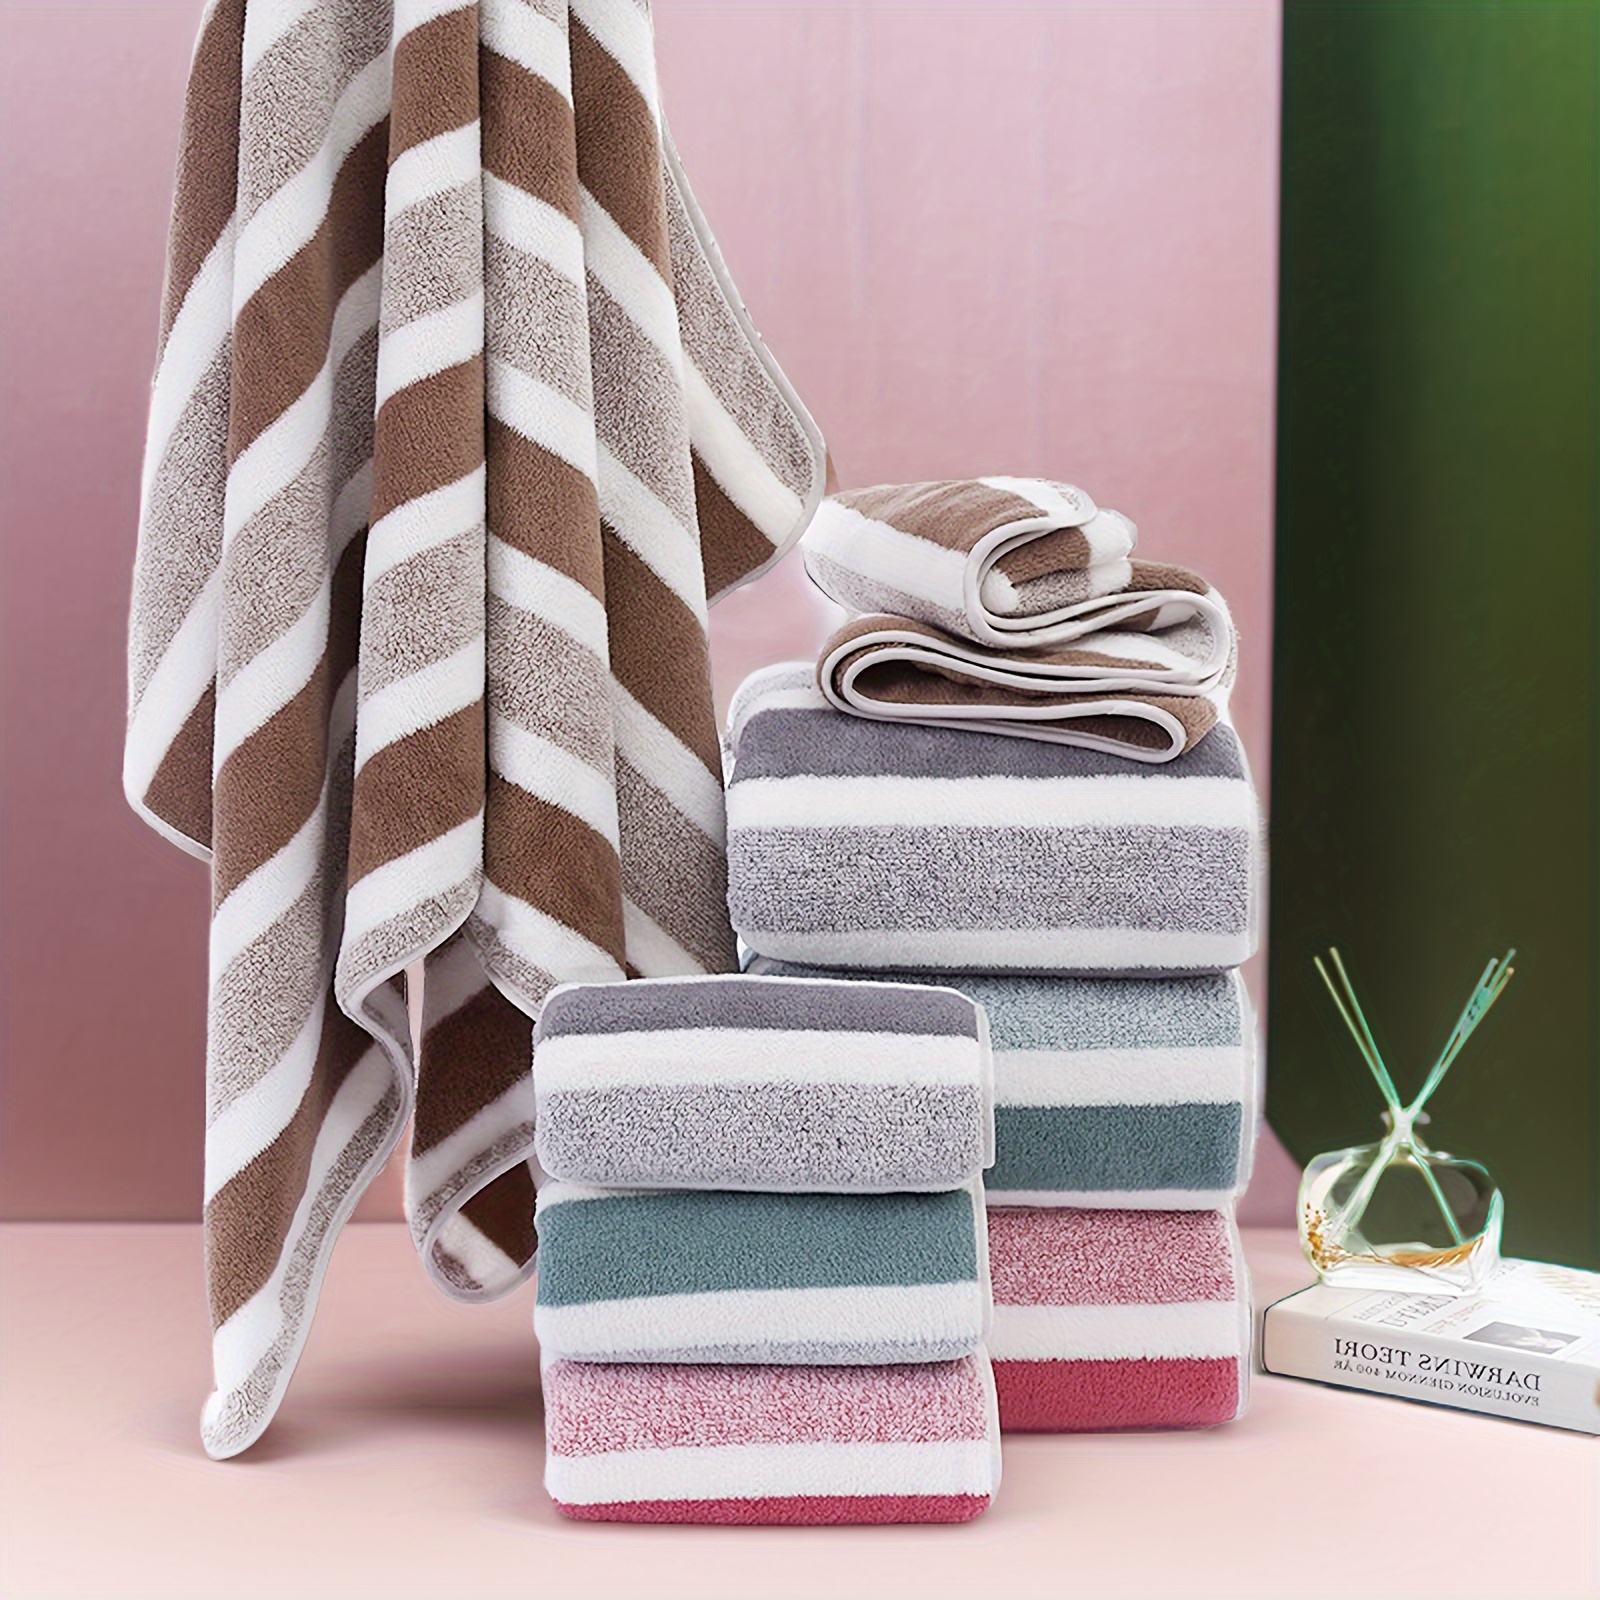 

2-piece Luxury Striped Bath Towel Set - Ultra Absorbent, Quick Dry & Soft - Gentle On Skin, Perfect For Home & Salon Decor Bath Towels Towels Bath